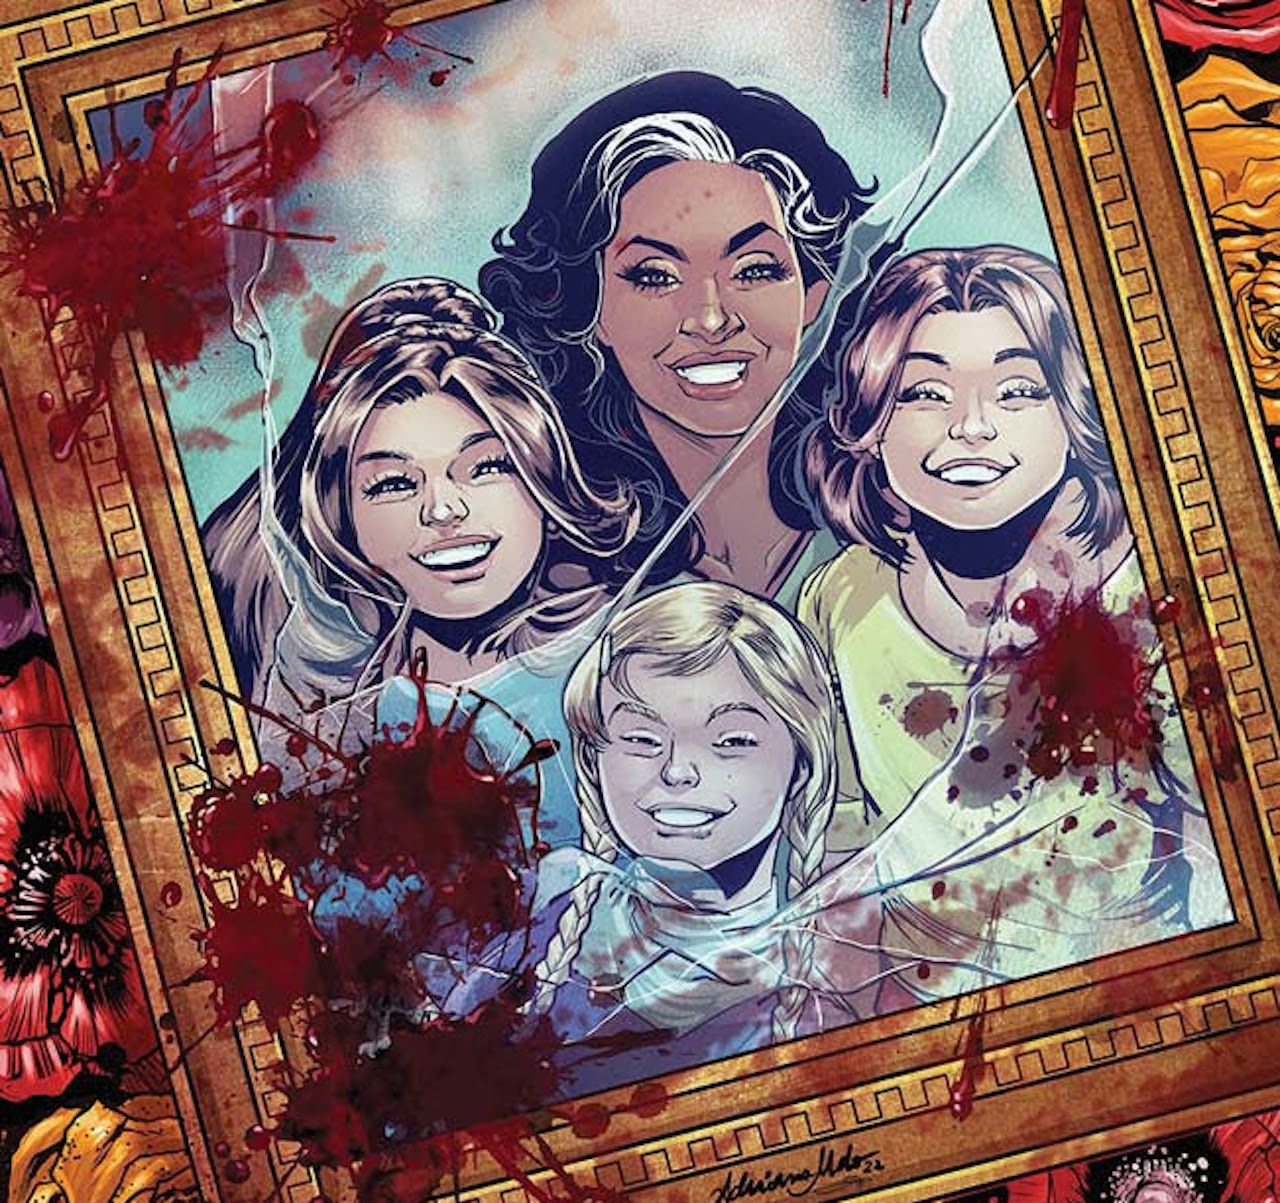 'Charmed' meets 'Charlie's Angels' in 'The Deadliest Bouquet'